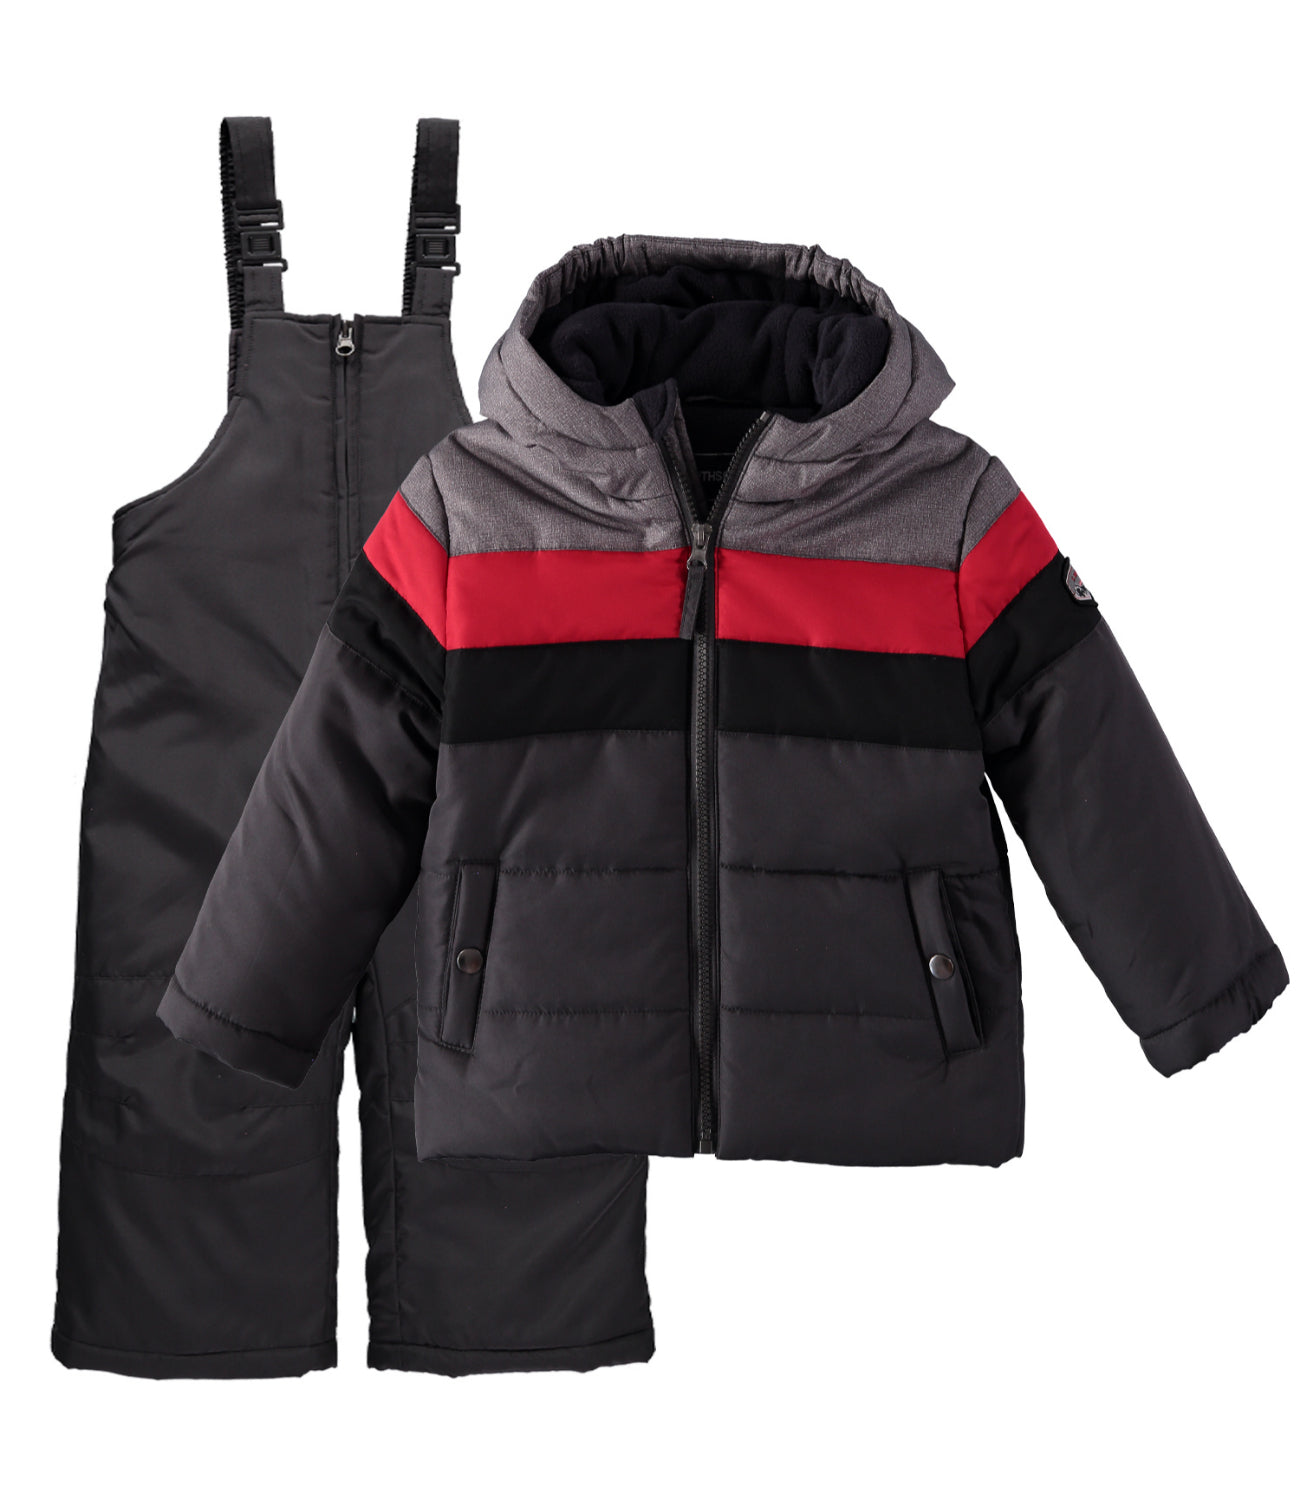 Rothschild Boys 2T-4T Colorblock 2-Piece Snowsuit with Matching Hat